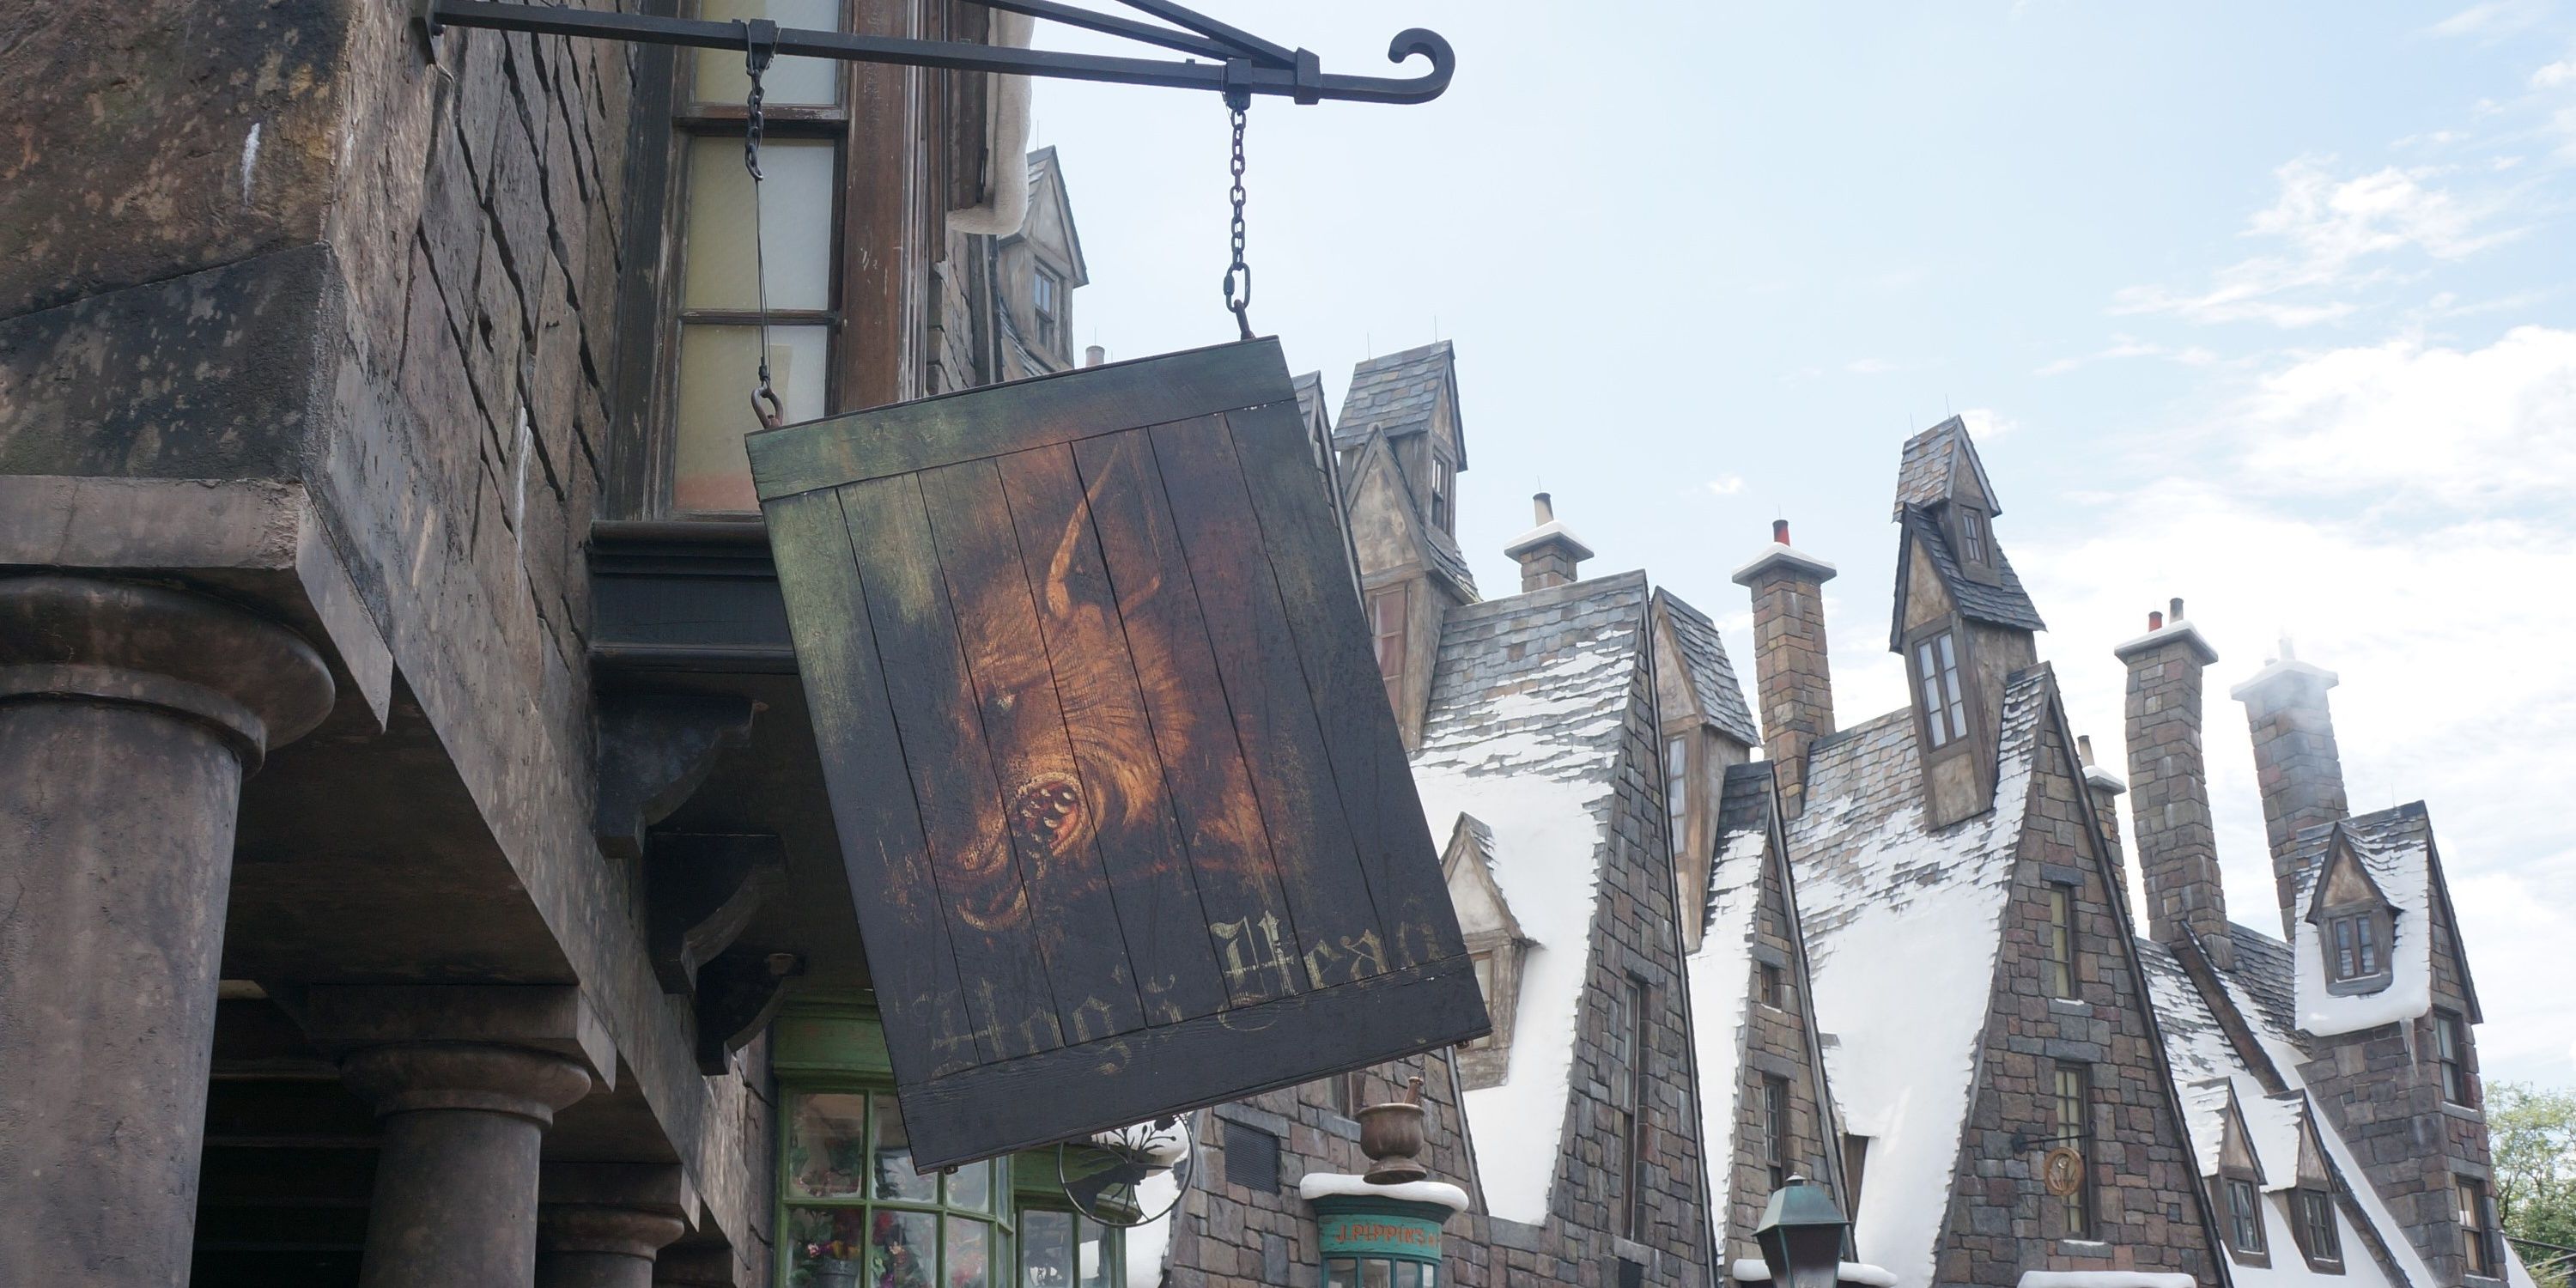 The outside sign of the Hog's Head Inn in the Harry Potter franchise